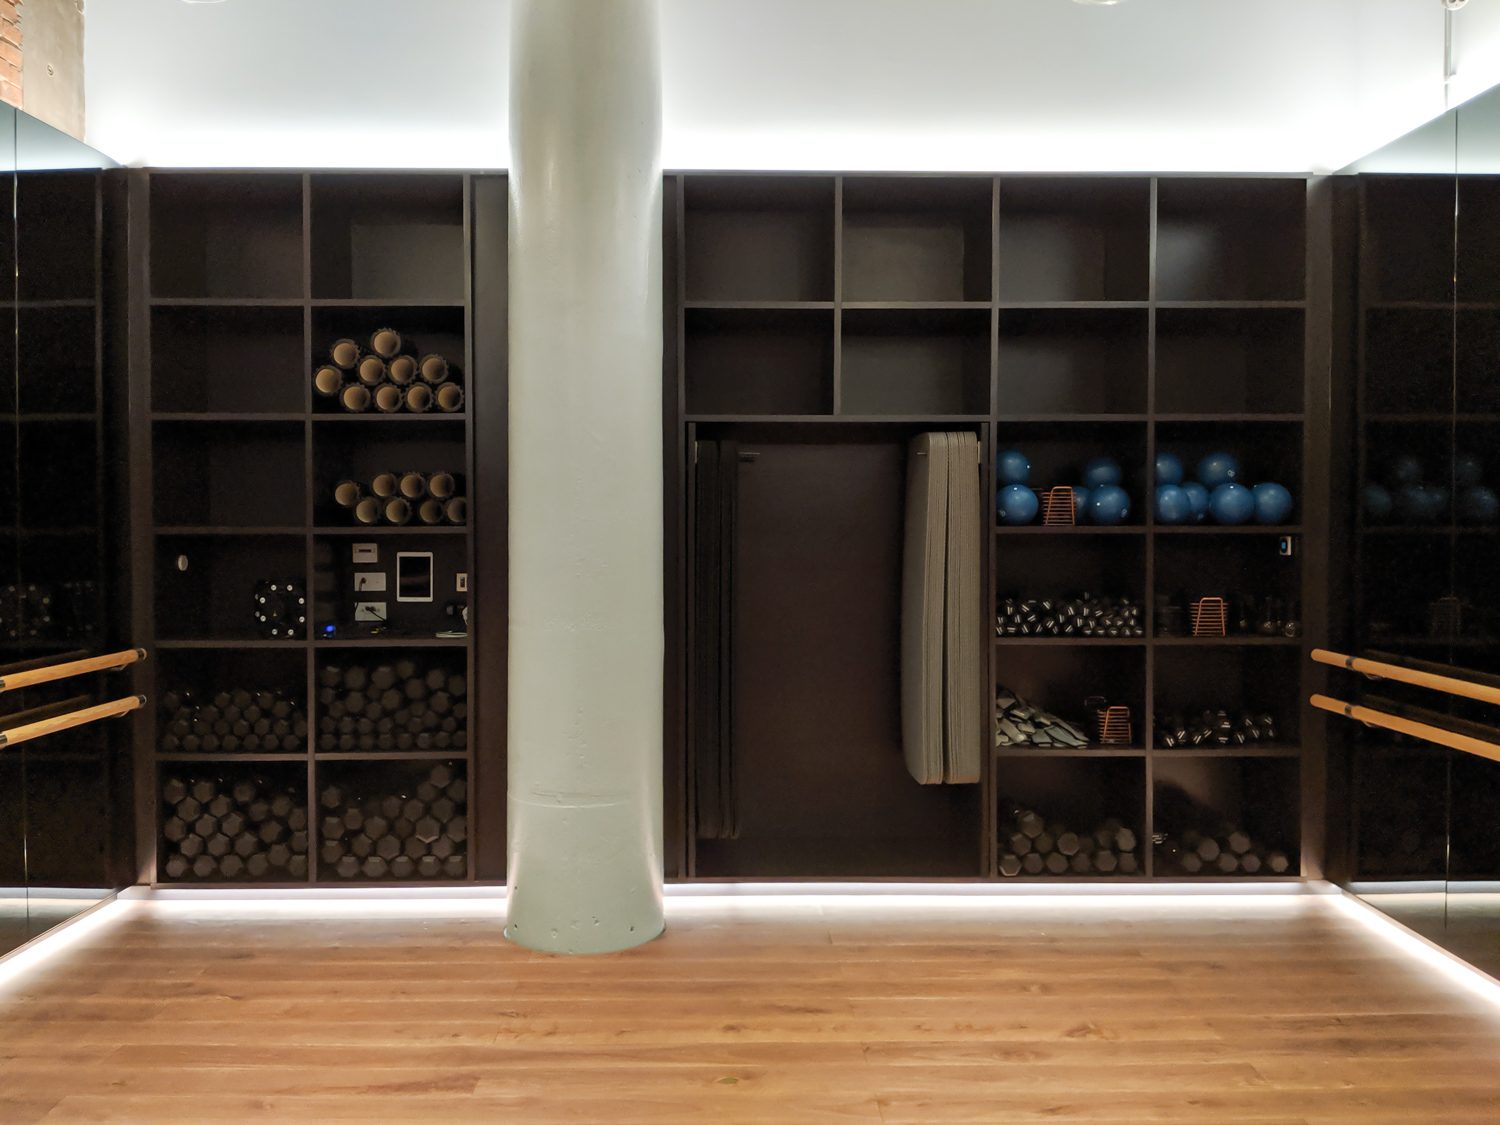 STUDIO 1, 3.5 x 5m Valchromat shelving unit with slide out yoga mat holders and media centre. 
